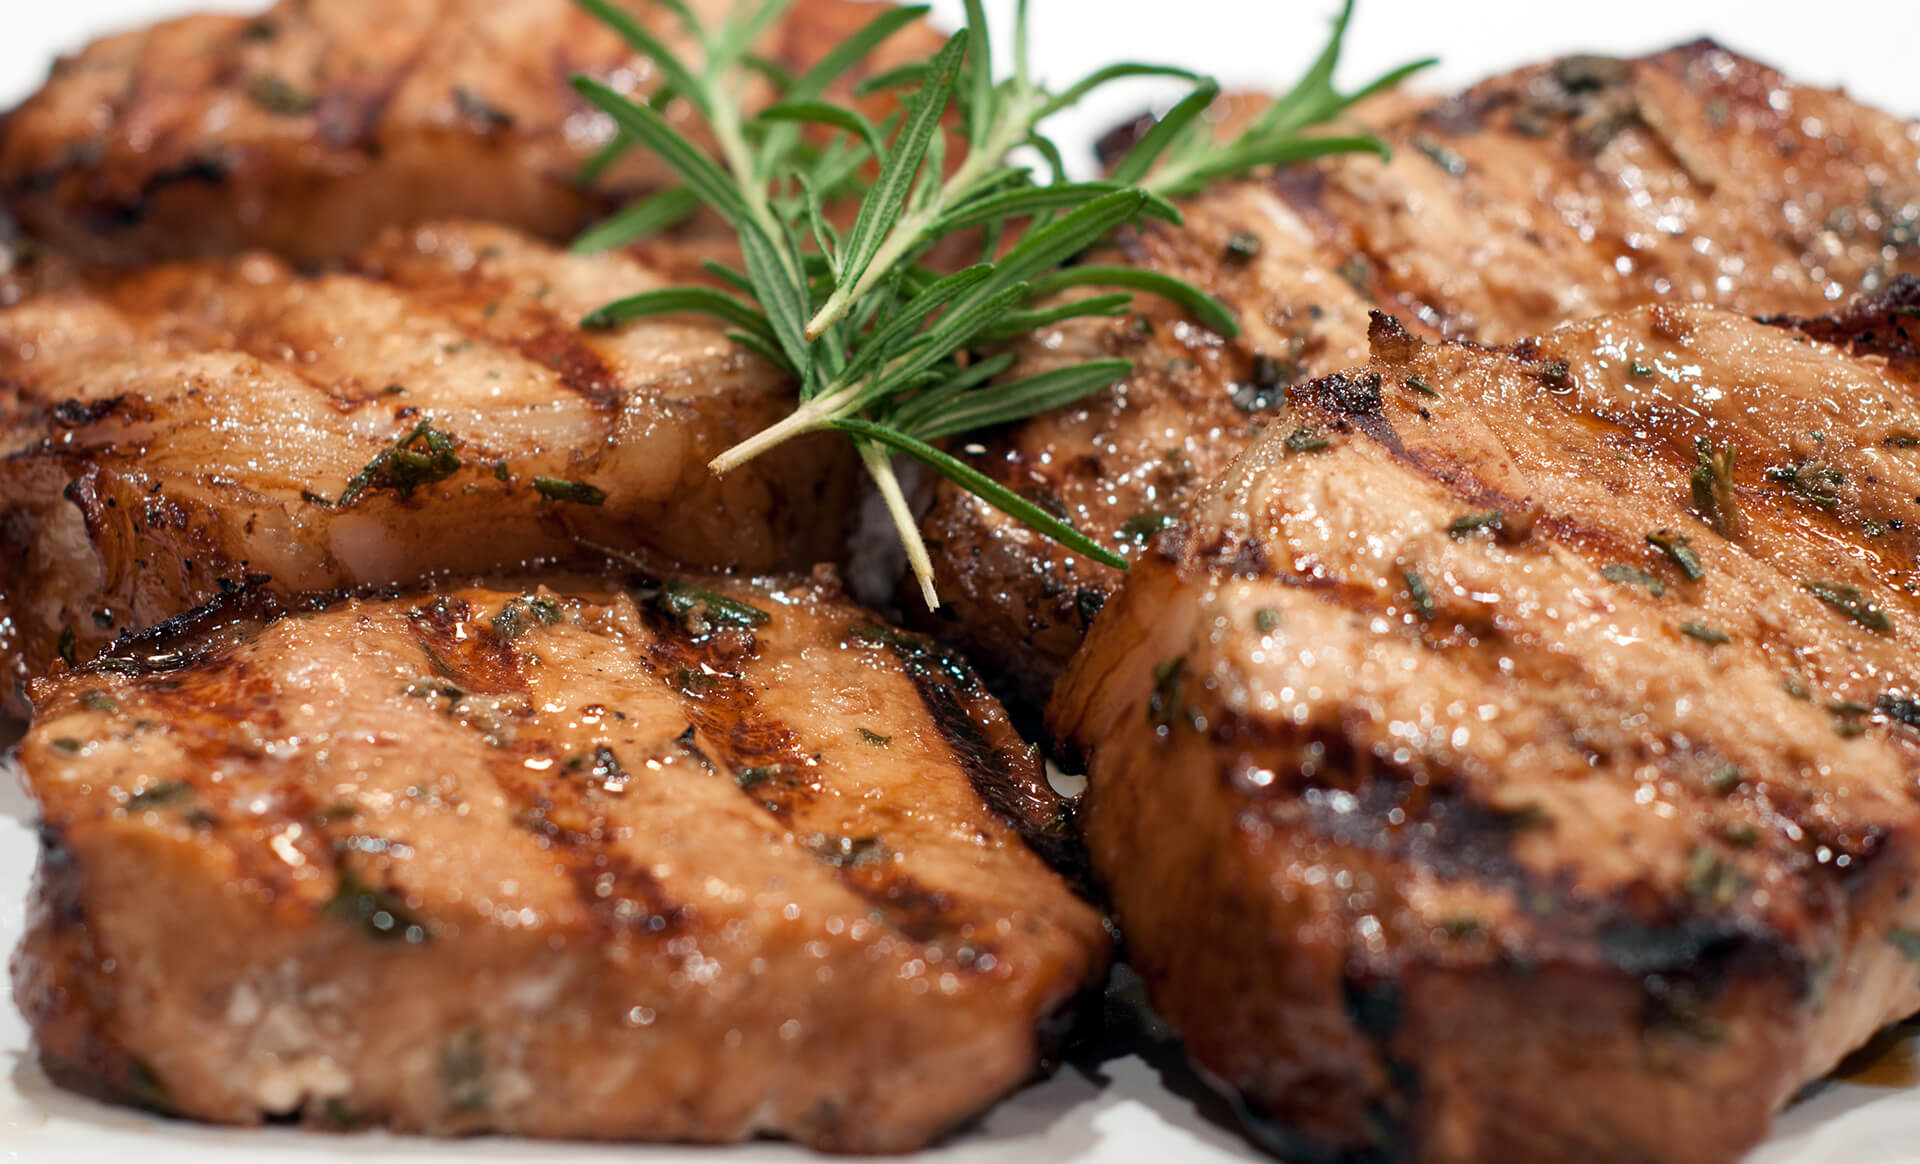 Balsamic and Rosemary Grilled Pork Chops